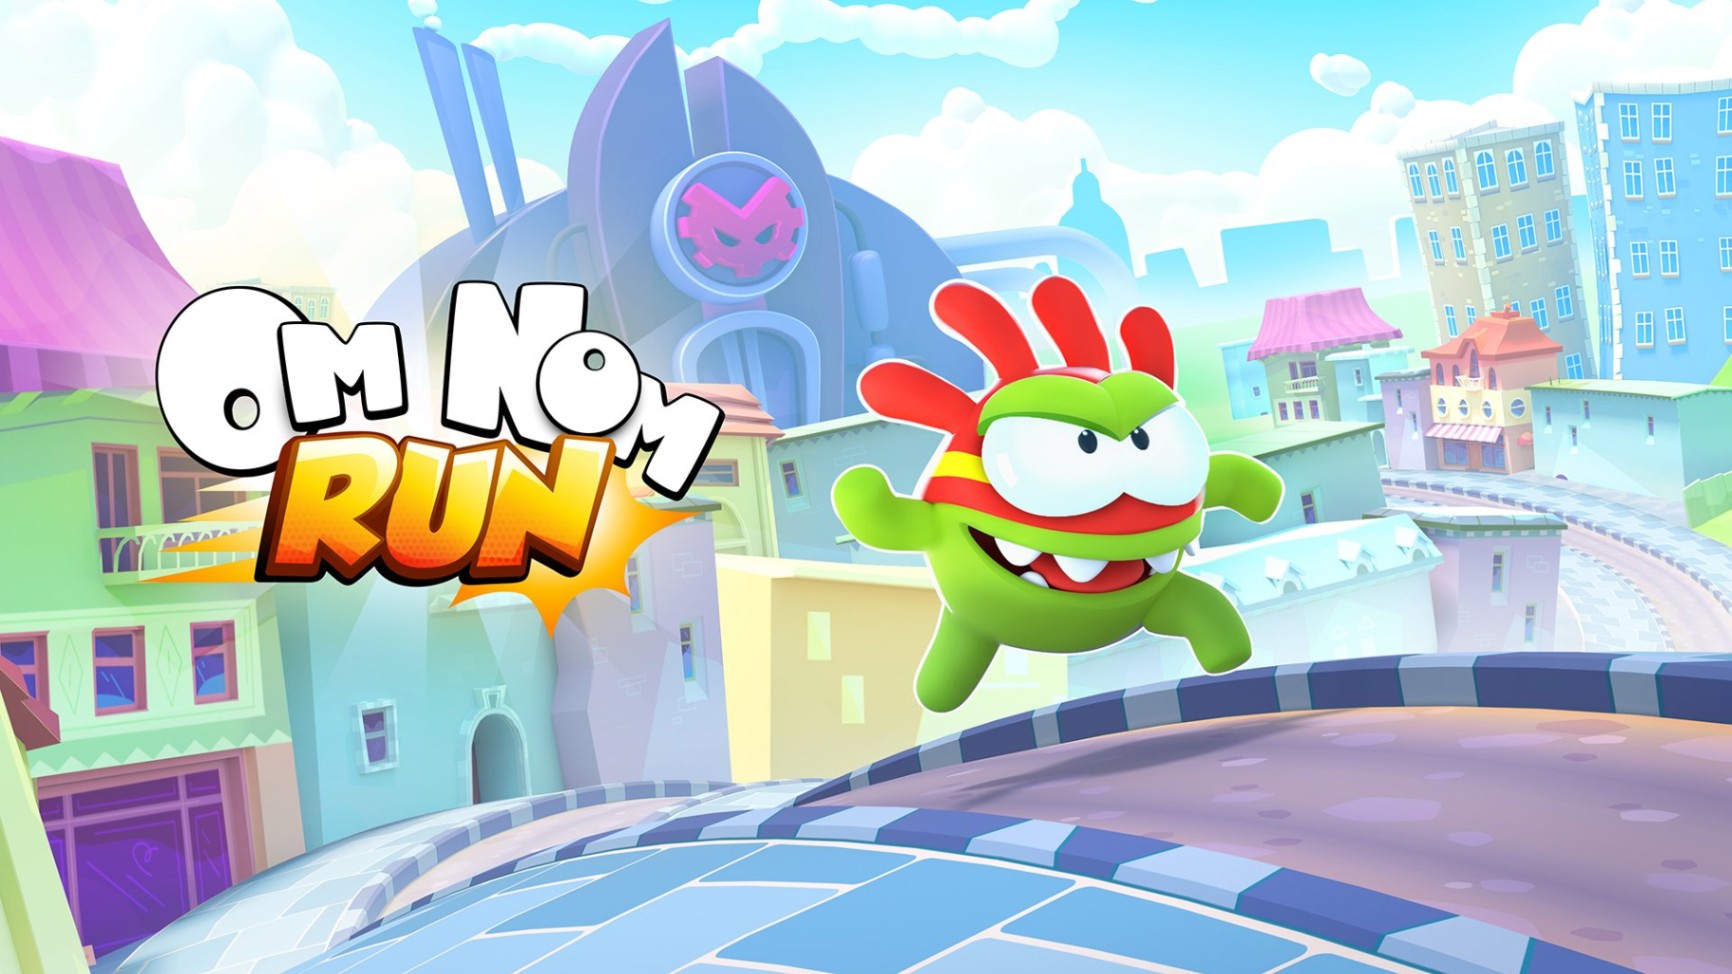 Om Nom: Run - How to Earn More Coins